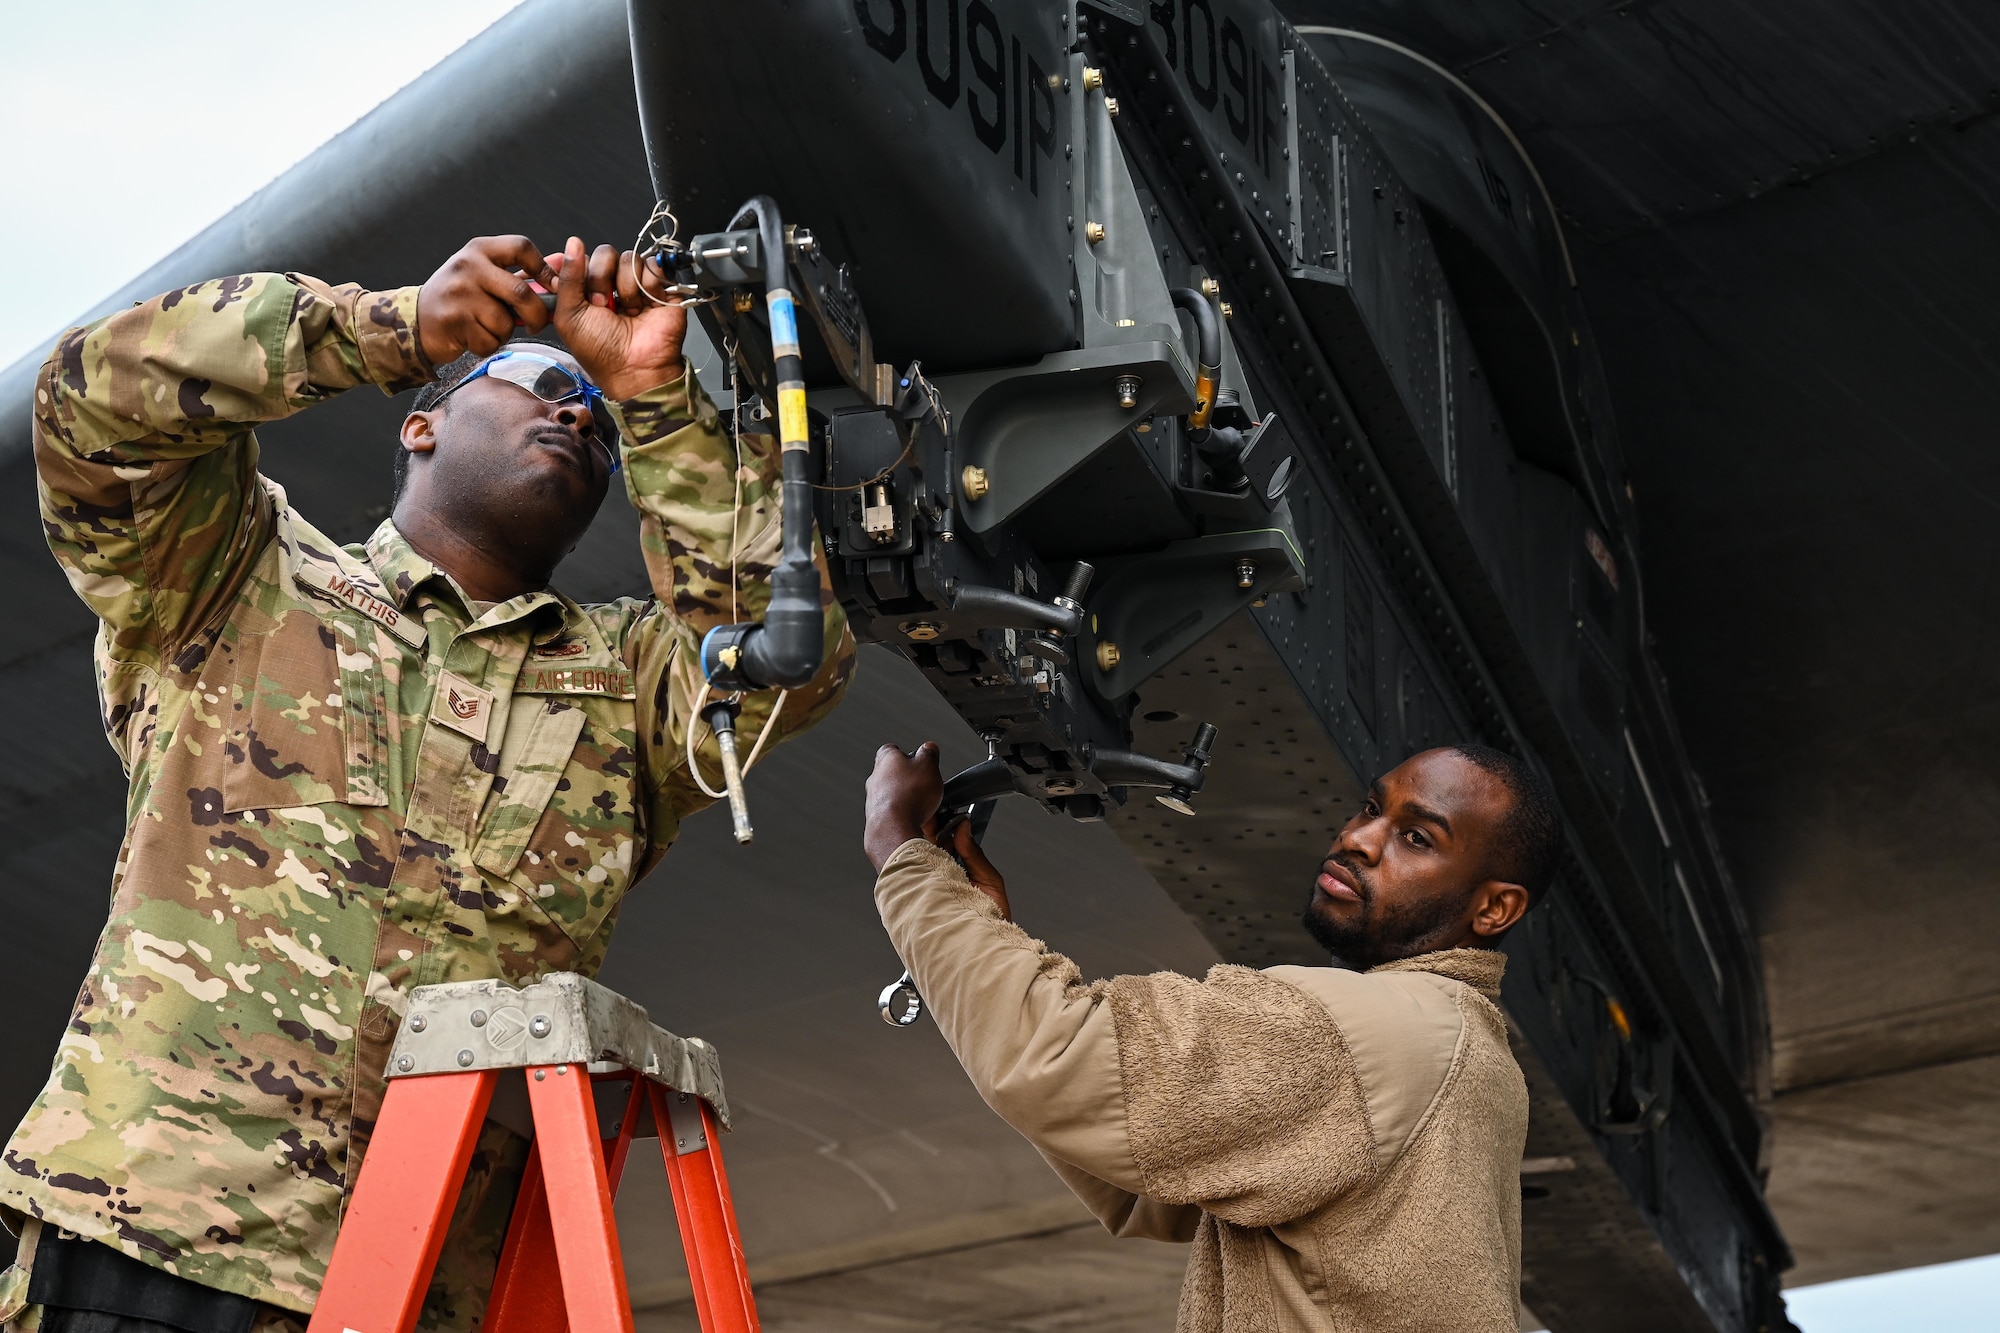 U.S. Air Force Tech Sgt. Charlie Mathis, 2nd Maintenance Group weapons standardization loading standardization crew member, and Tech Sgt. Darrell Stewart, 307th Aircraft Maintenance Squadron loading standardization crew member, prepares a B-52H Stratofortress ejector rack for loading munitions, at Barksdale Air Force Base, Louisiana, Nov. 2, 2022